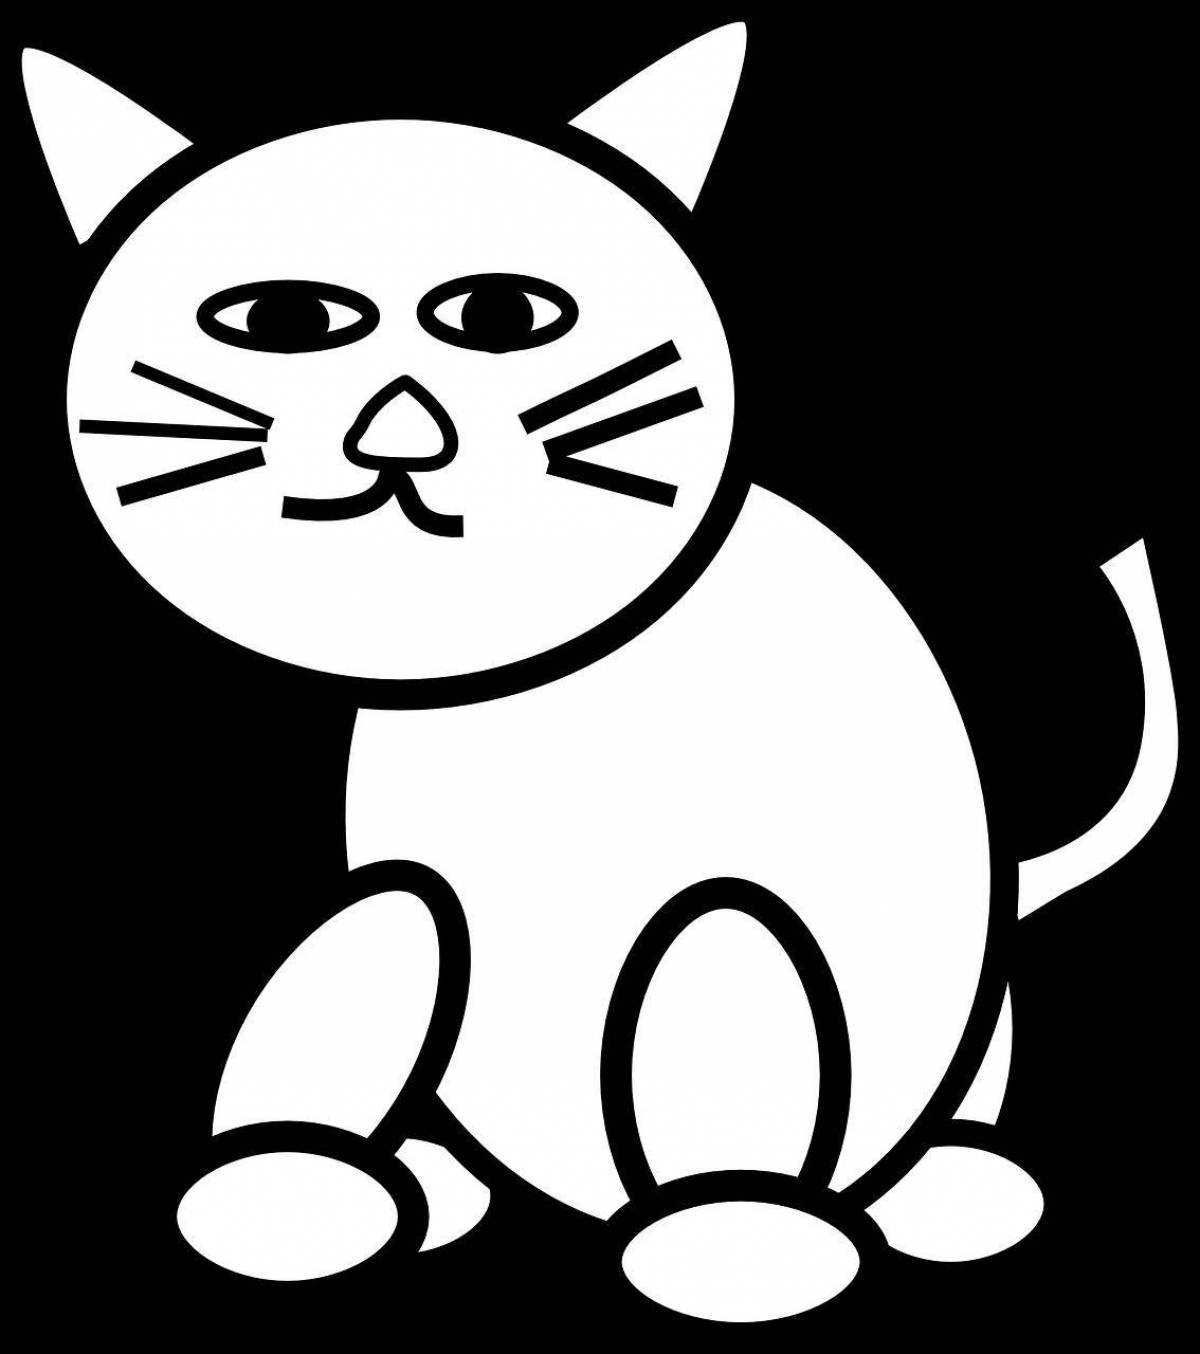 Coloring book playful black and white cat